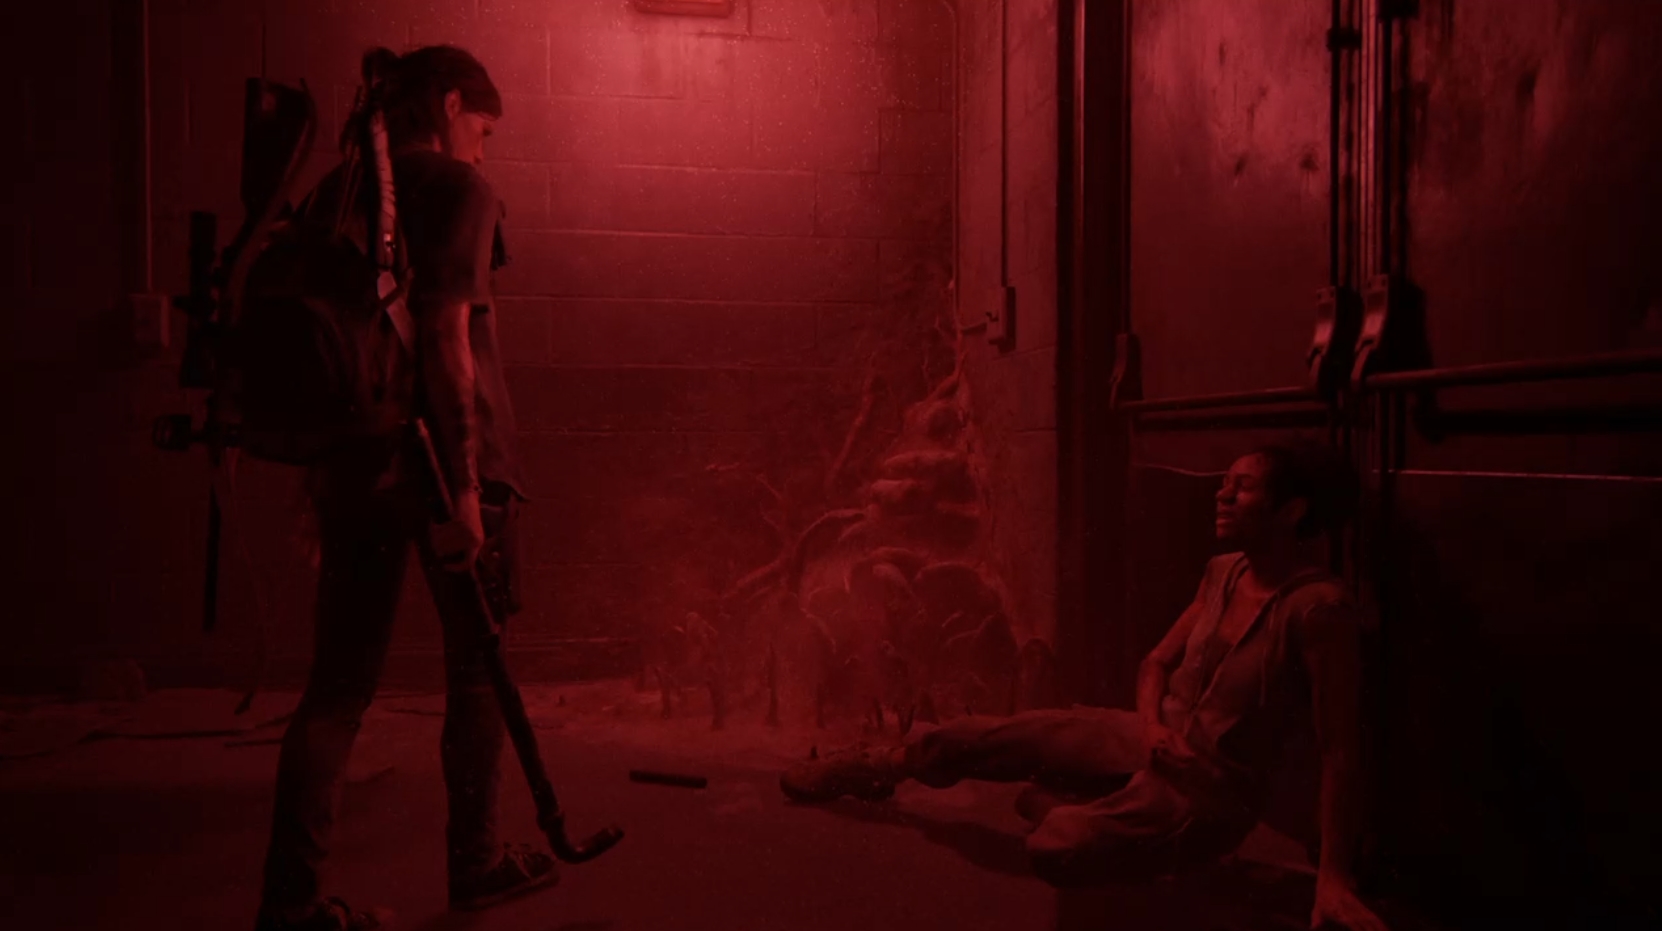 Ellie standing on the left over Nora who is on the ground on the right looking up at her. The lighting is all red.